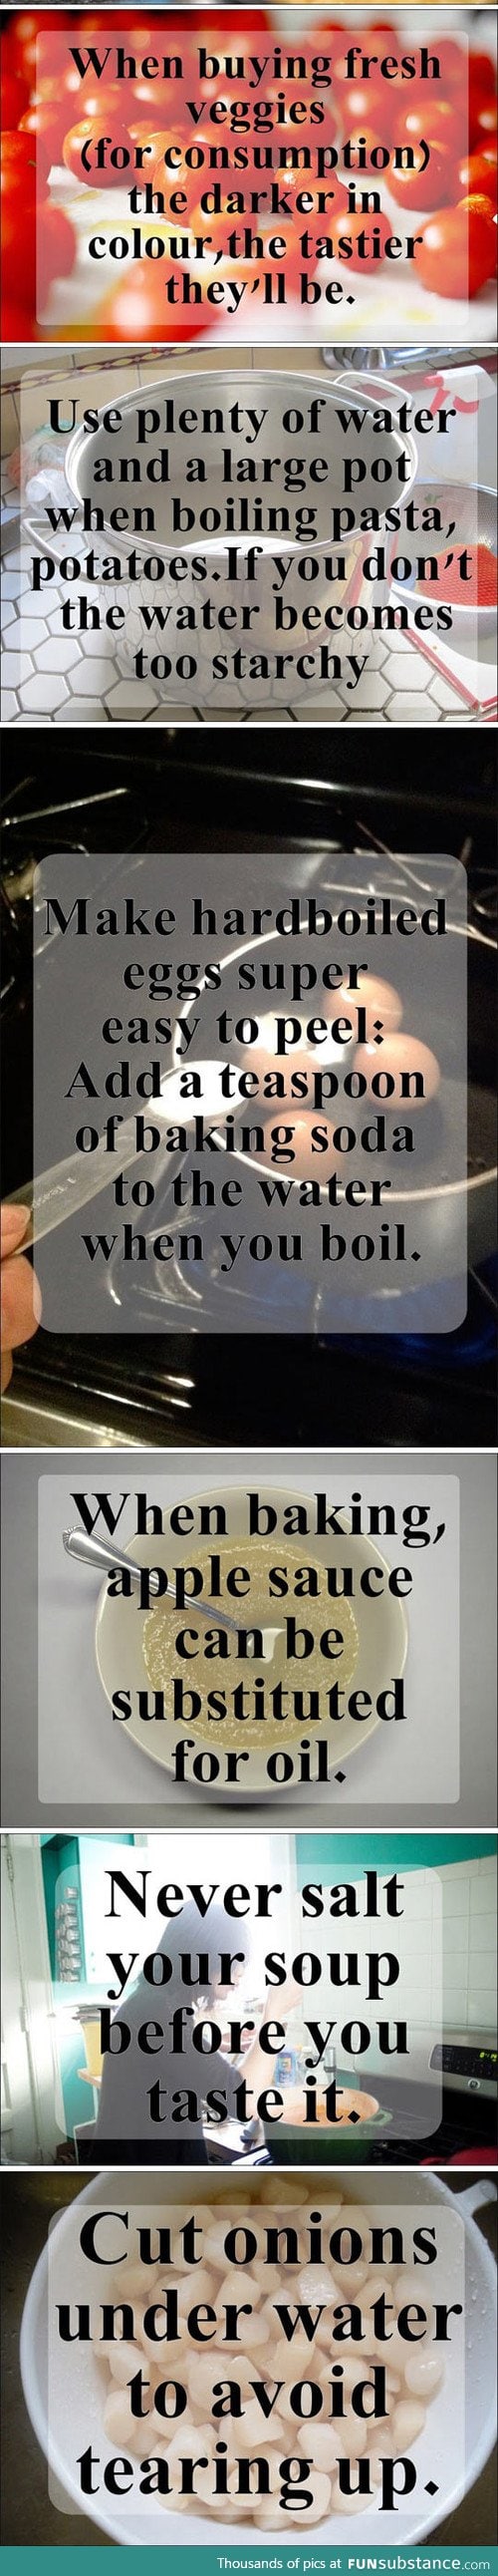 Helpful cooking tips